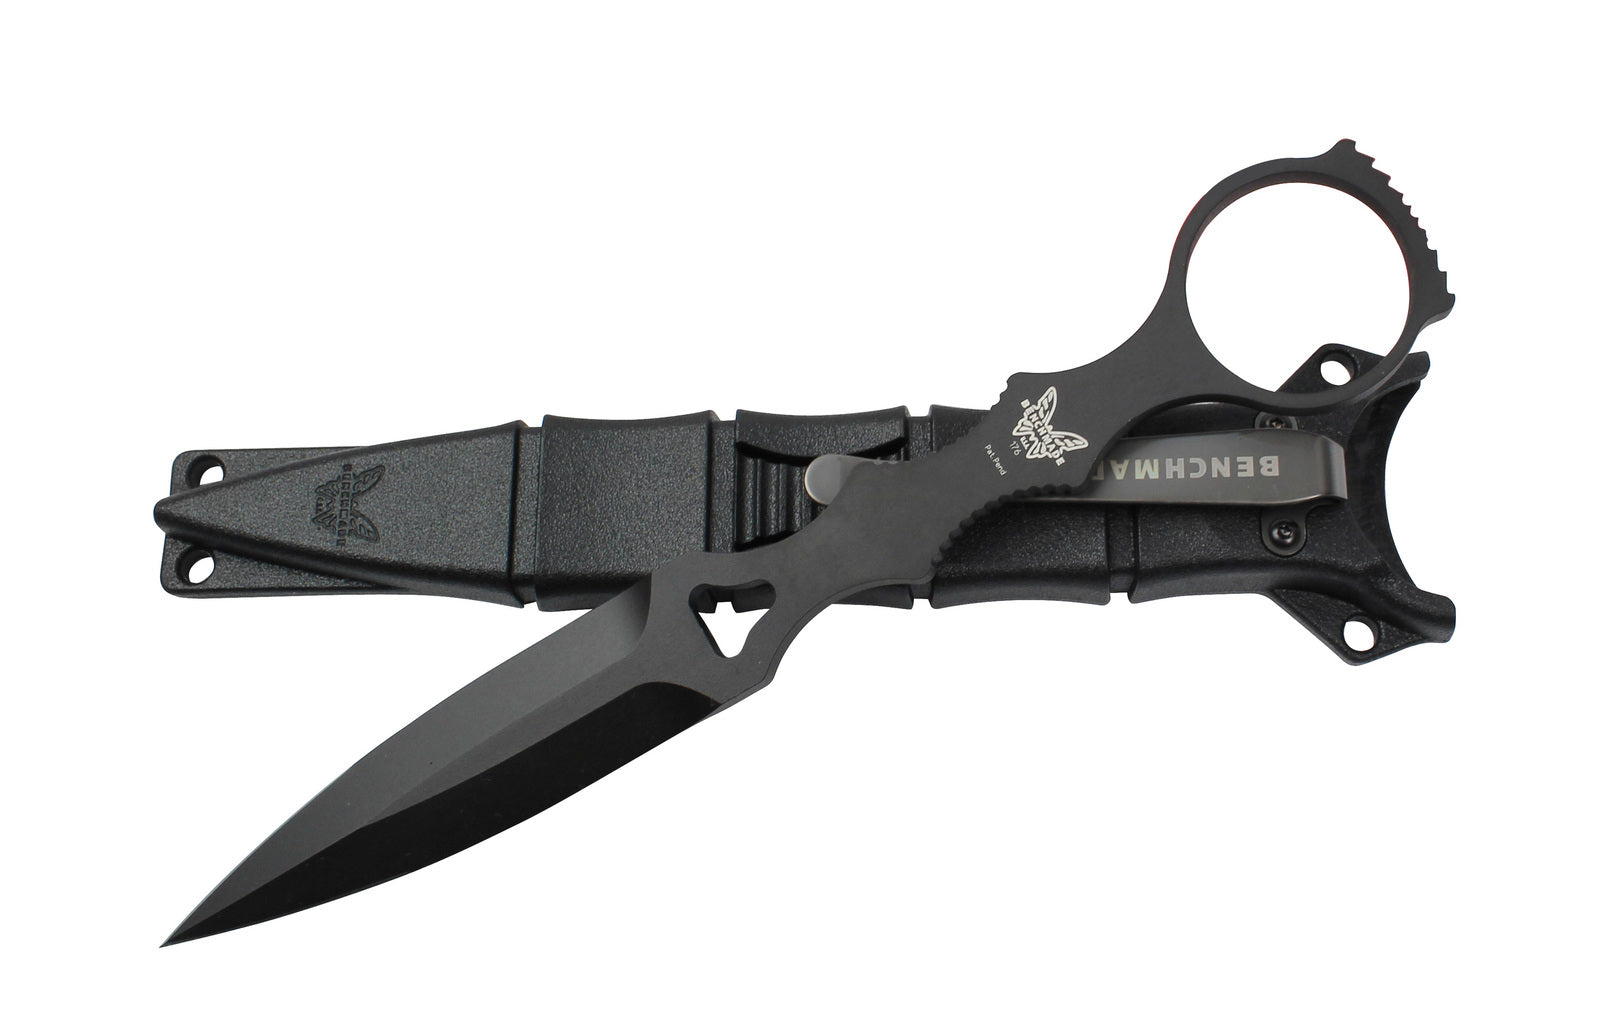 Benchmade 176BK Thompson SOCP (Special Operations Combatives Program) - Fixed Blade with Black Sheath - Wander Outdoors